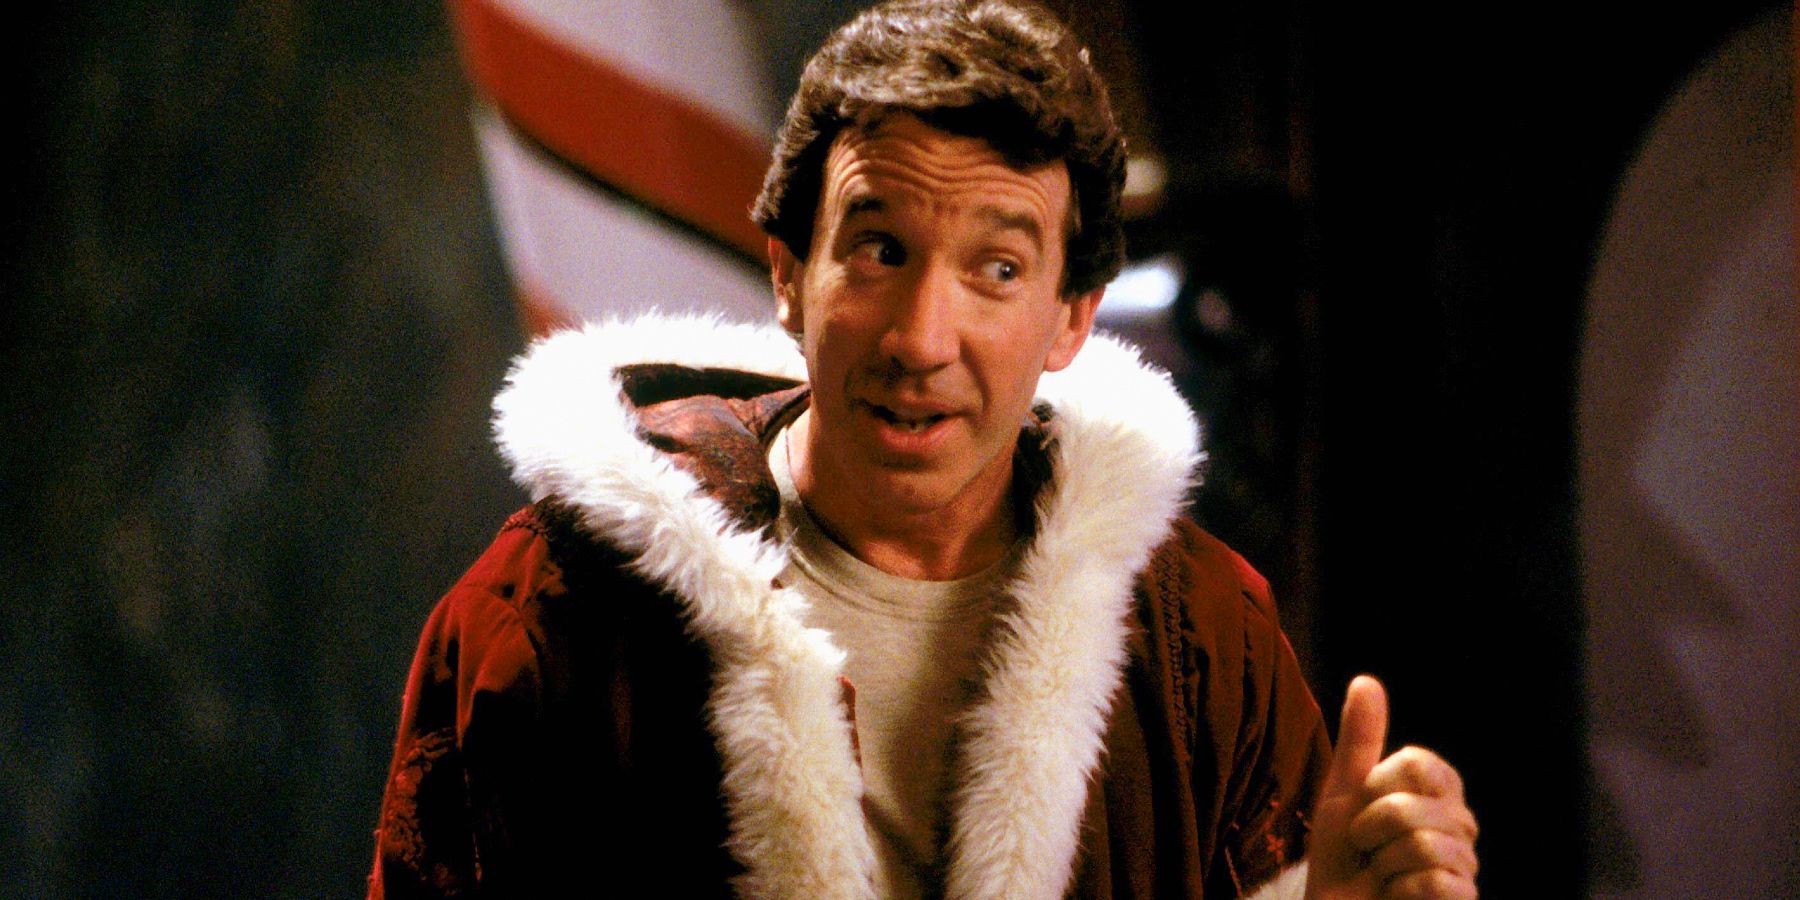 Tim Allen giving a thumbs up in The Santa Clause